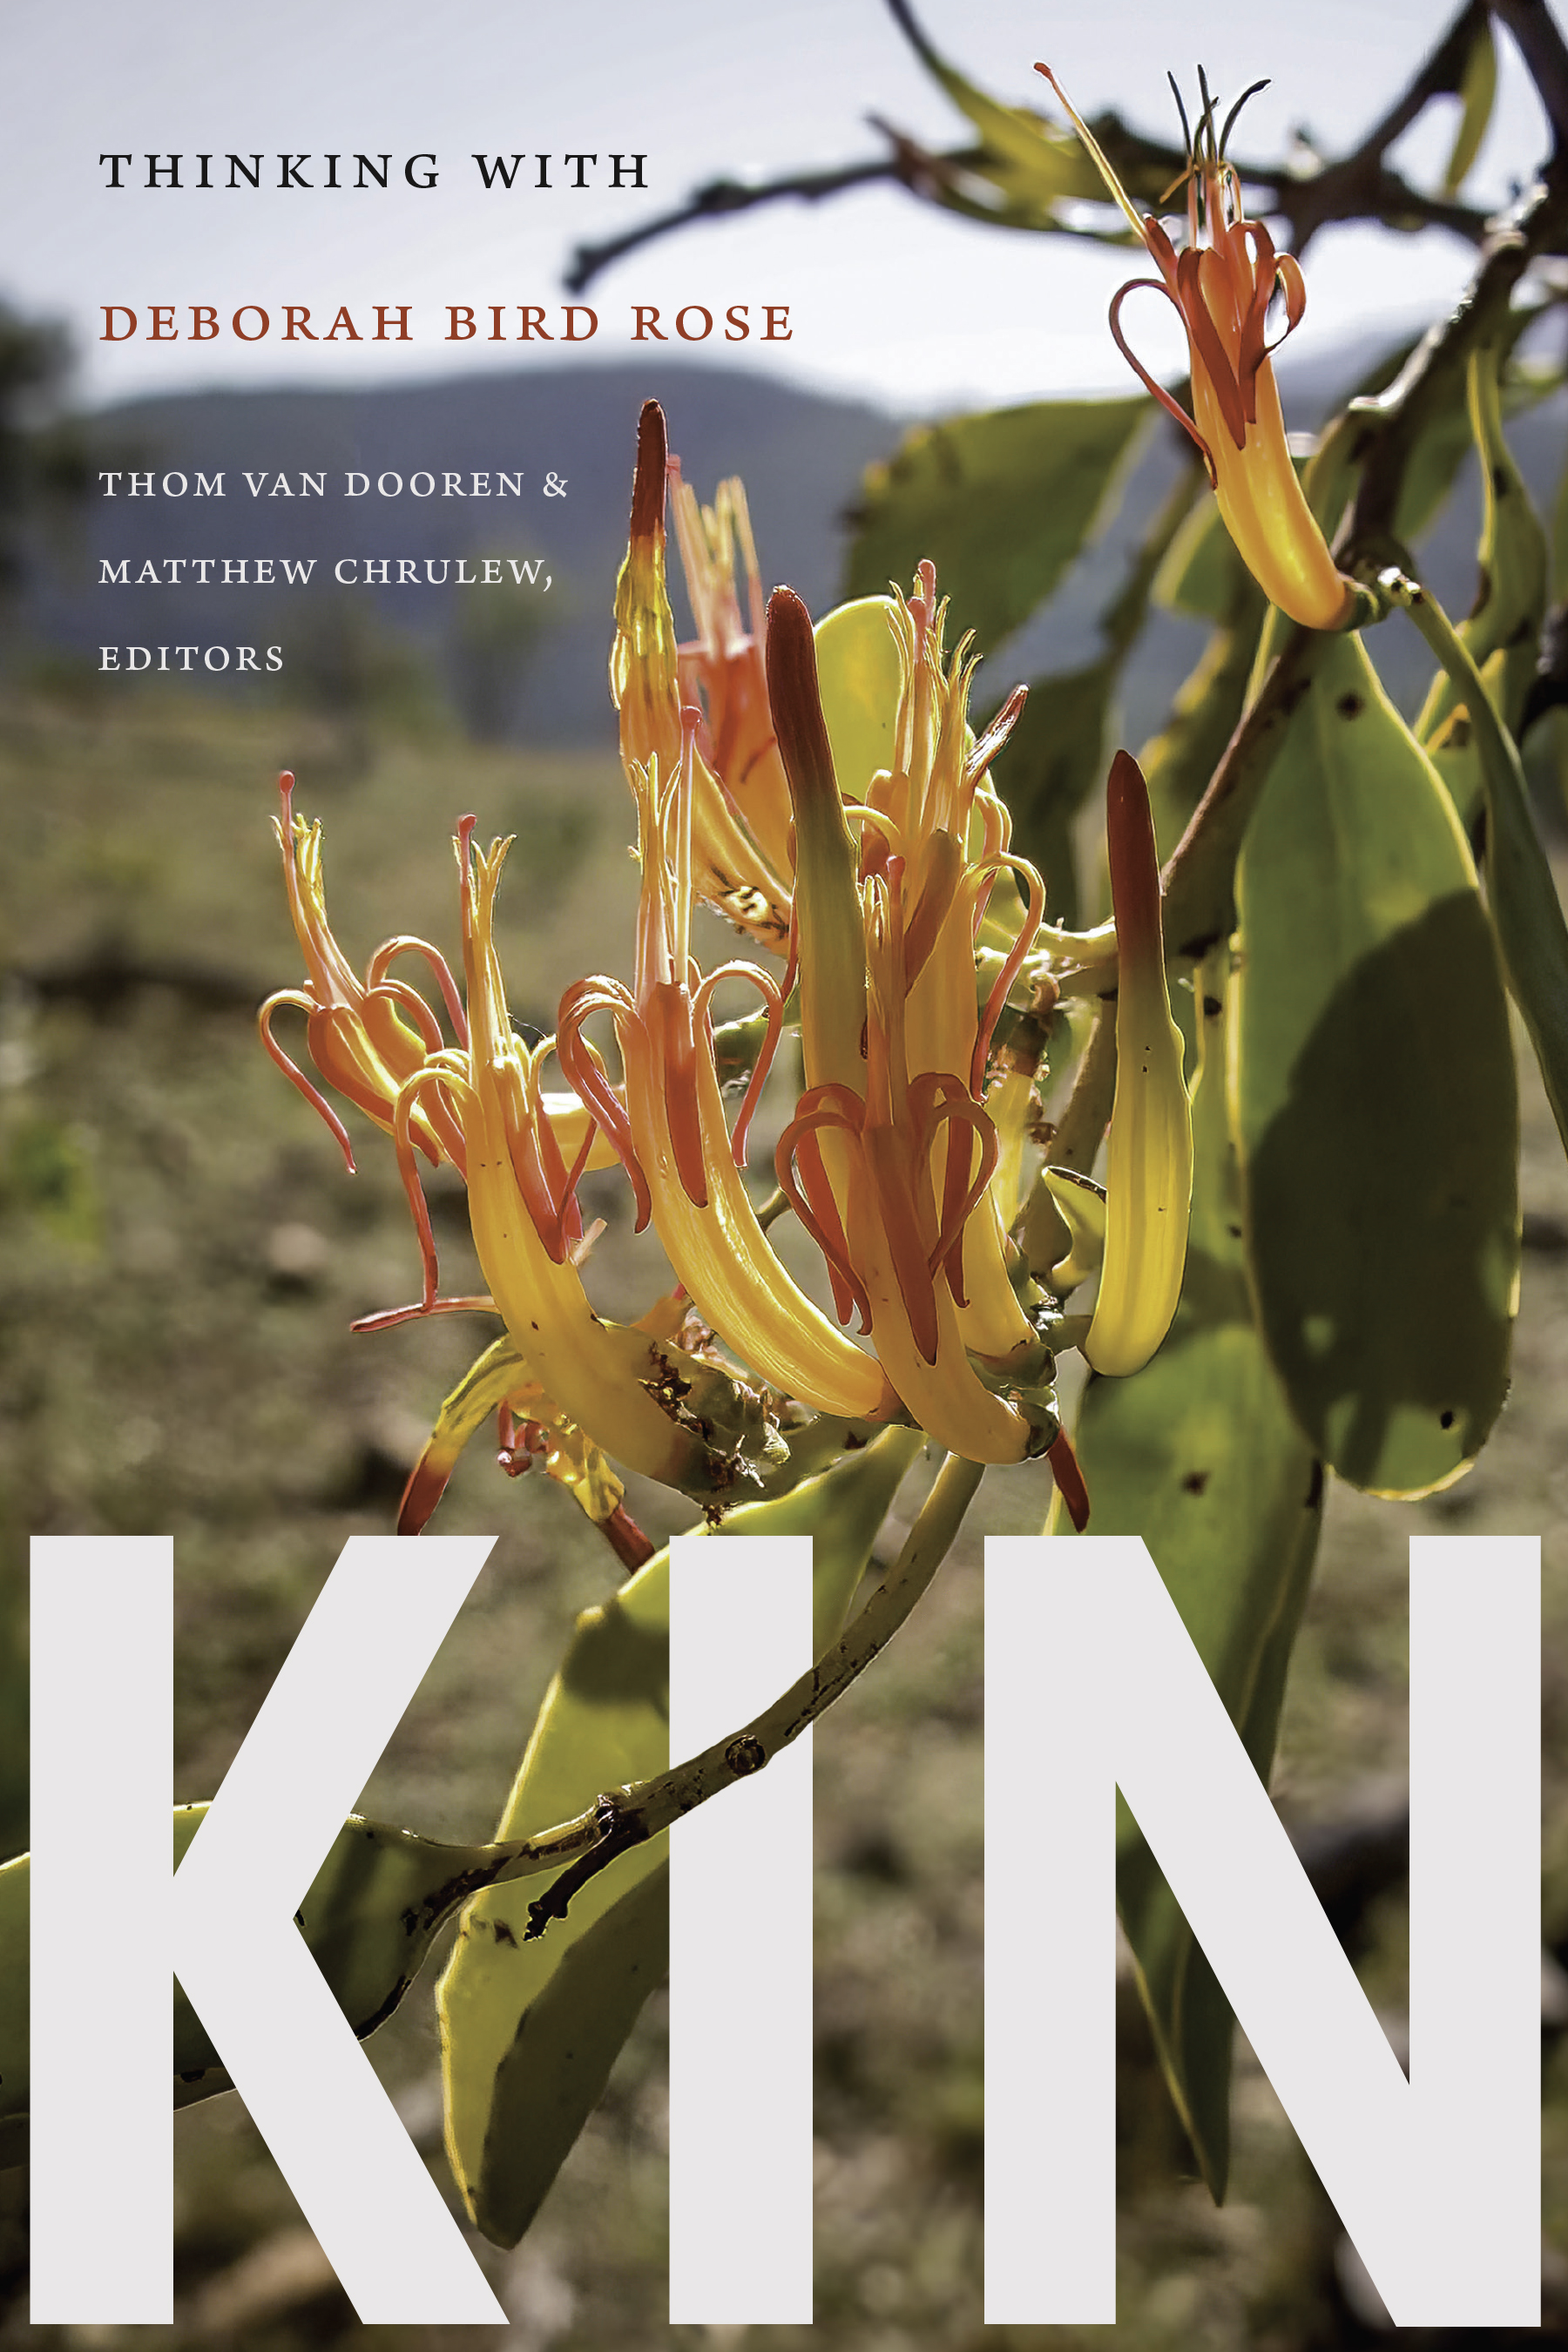 This image shos the fornt cover of the book, Kin: Thinking with Deborah Bird Rose. The title is written i bold large letters on a flower background.